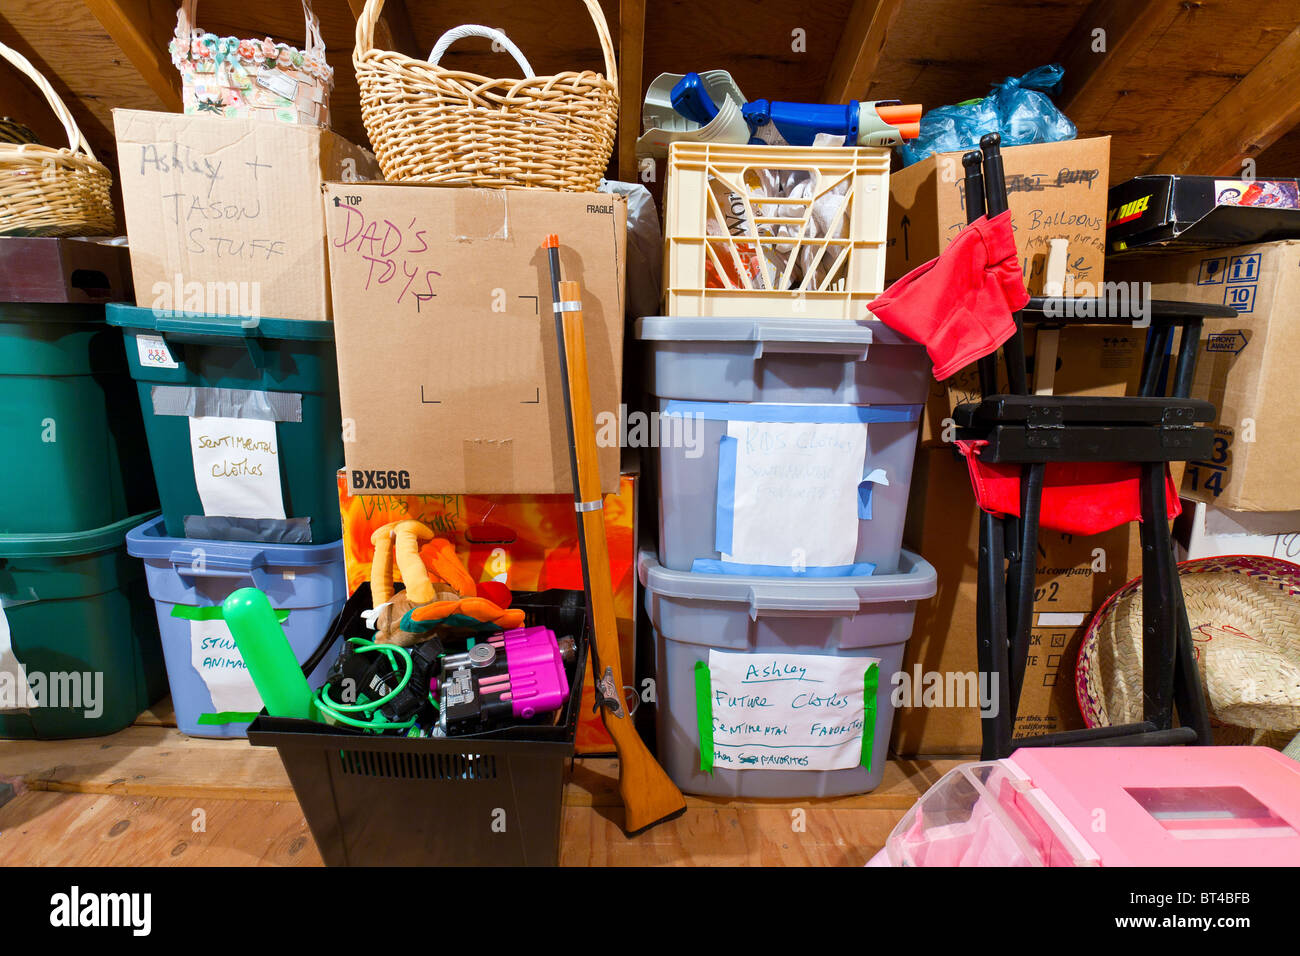 Boxes, Books and other things in Attic Storage Stock Photo - Alamy